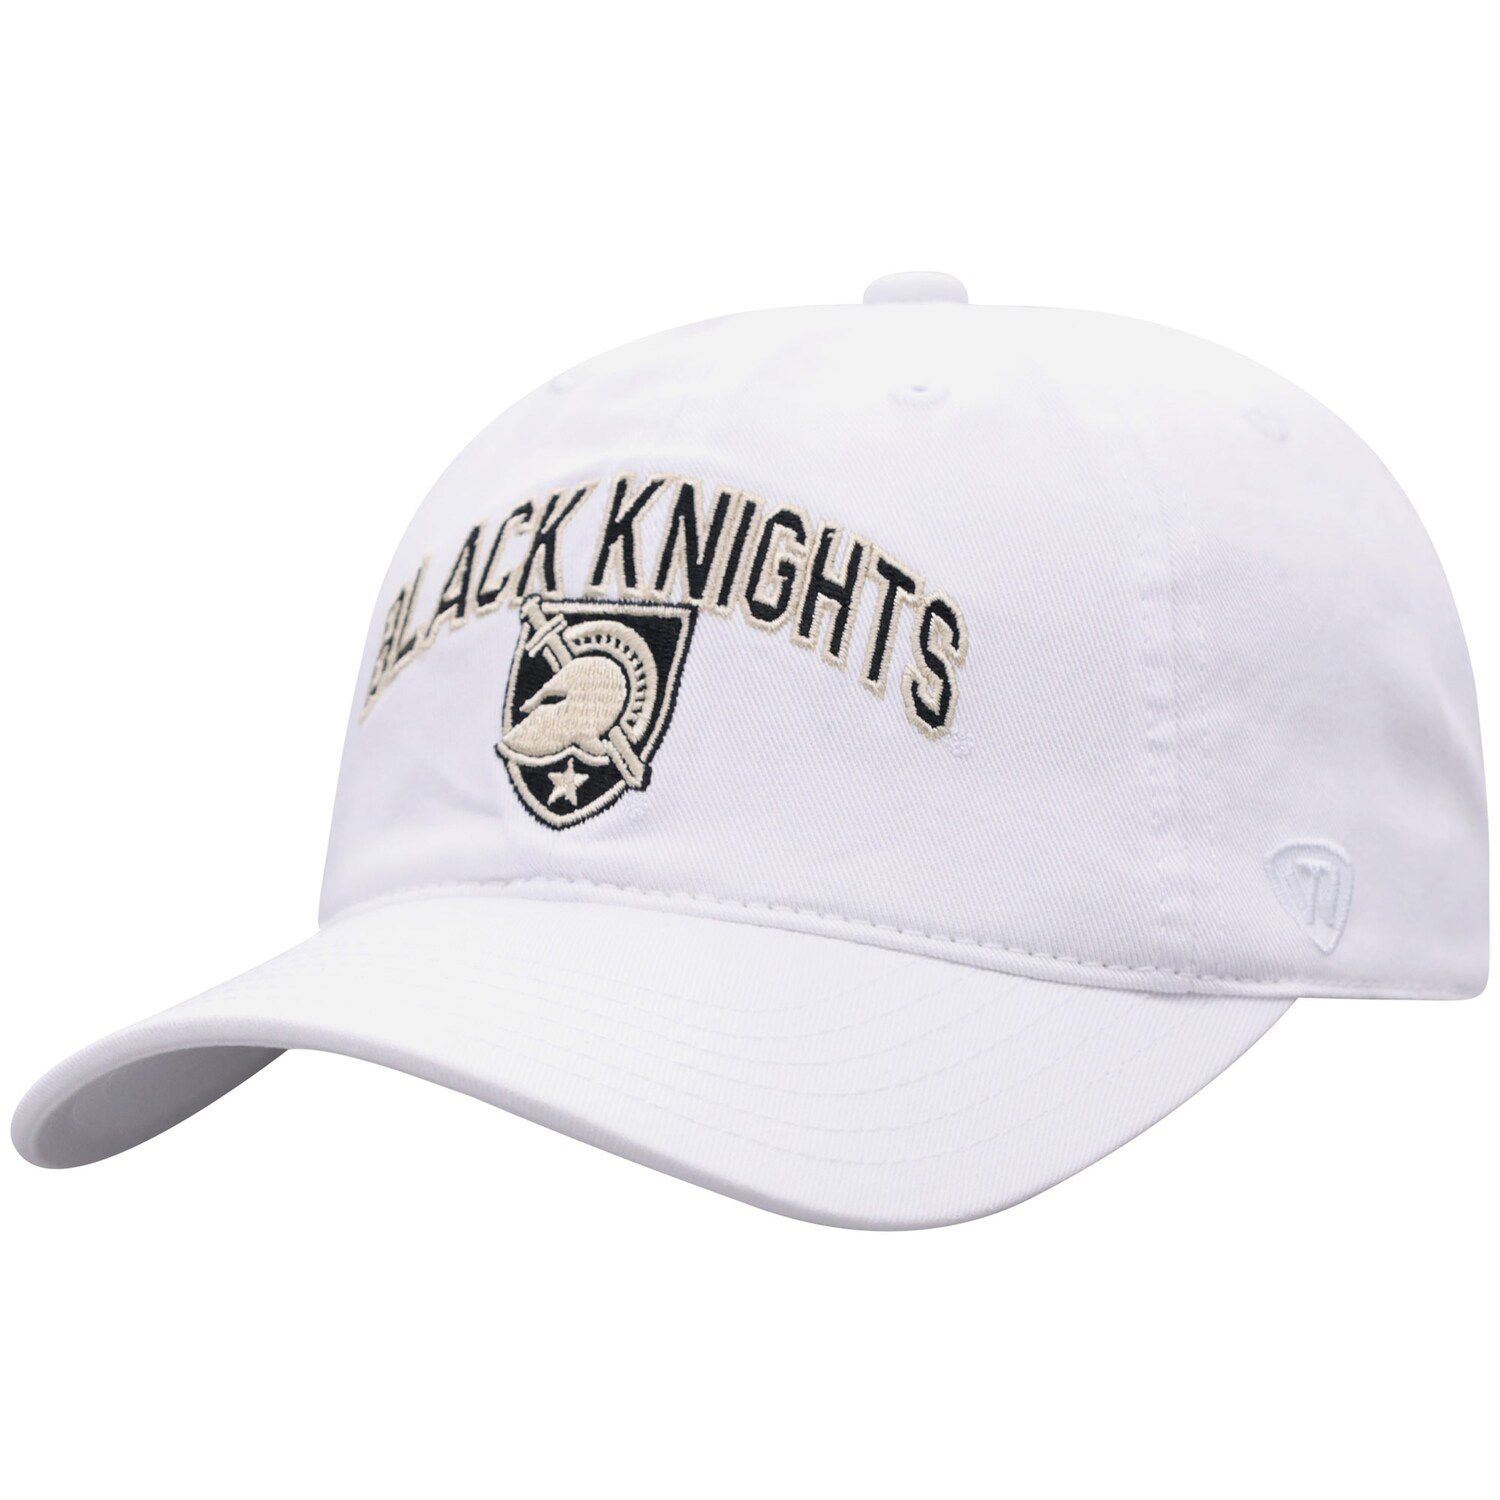 Image for Unbranded Men's Top of the World White Army Black Knights Classic Arch Adjustable Hat at Kohl's.